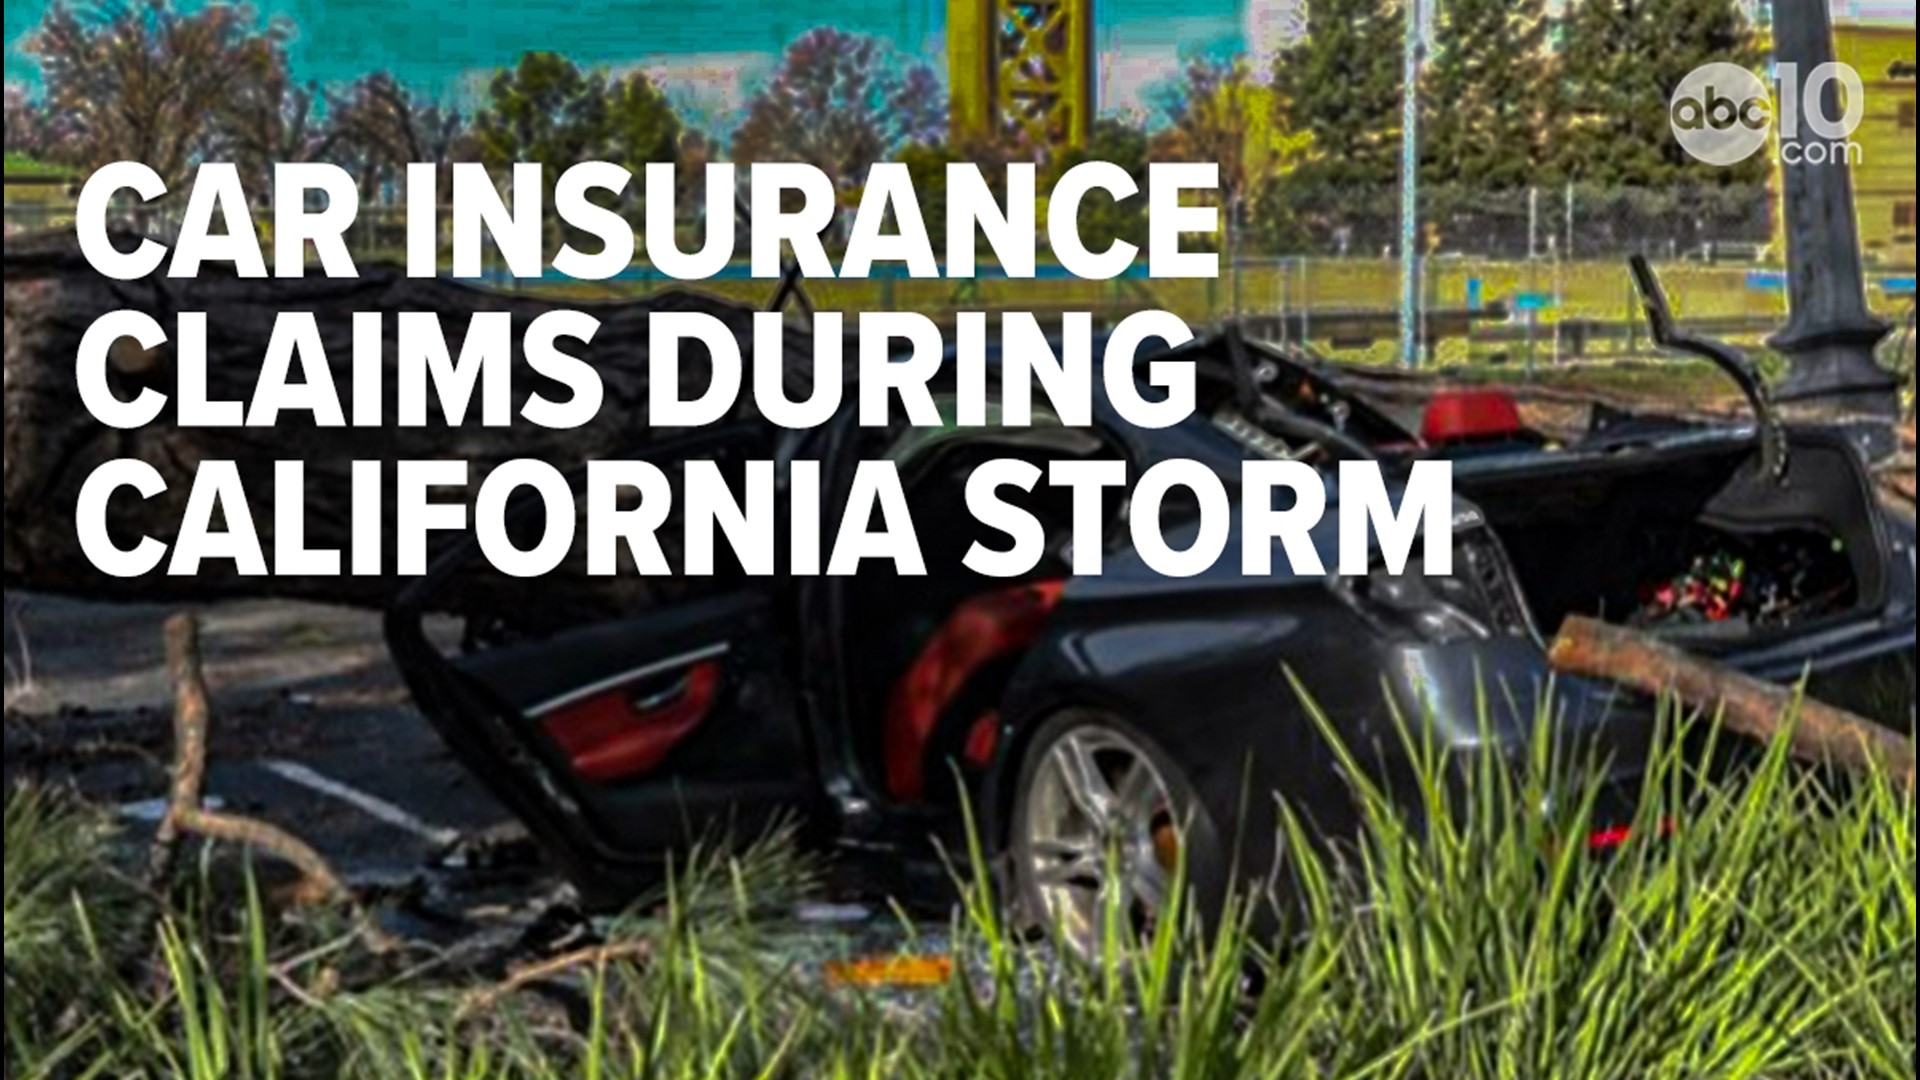 For Northern California residents lost in the insurance paperwork when filing car damage claims during the storm, your local mechanic can help.